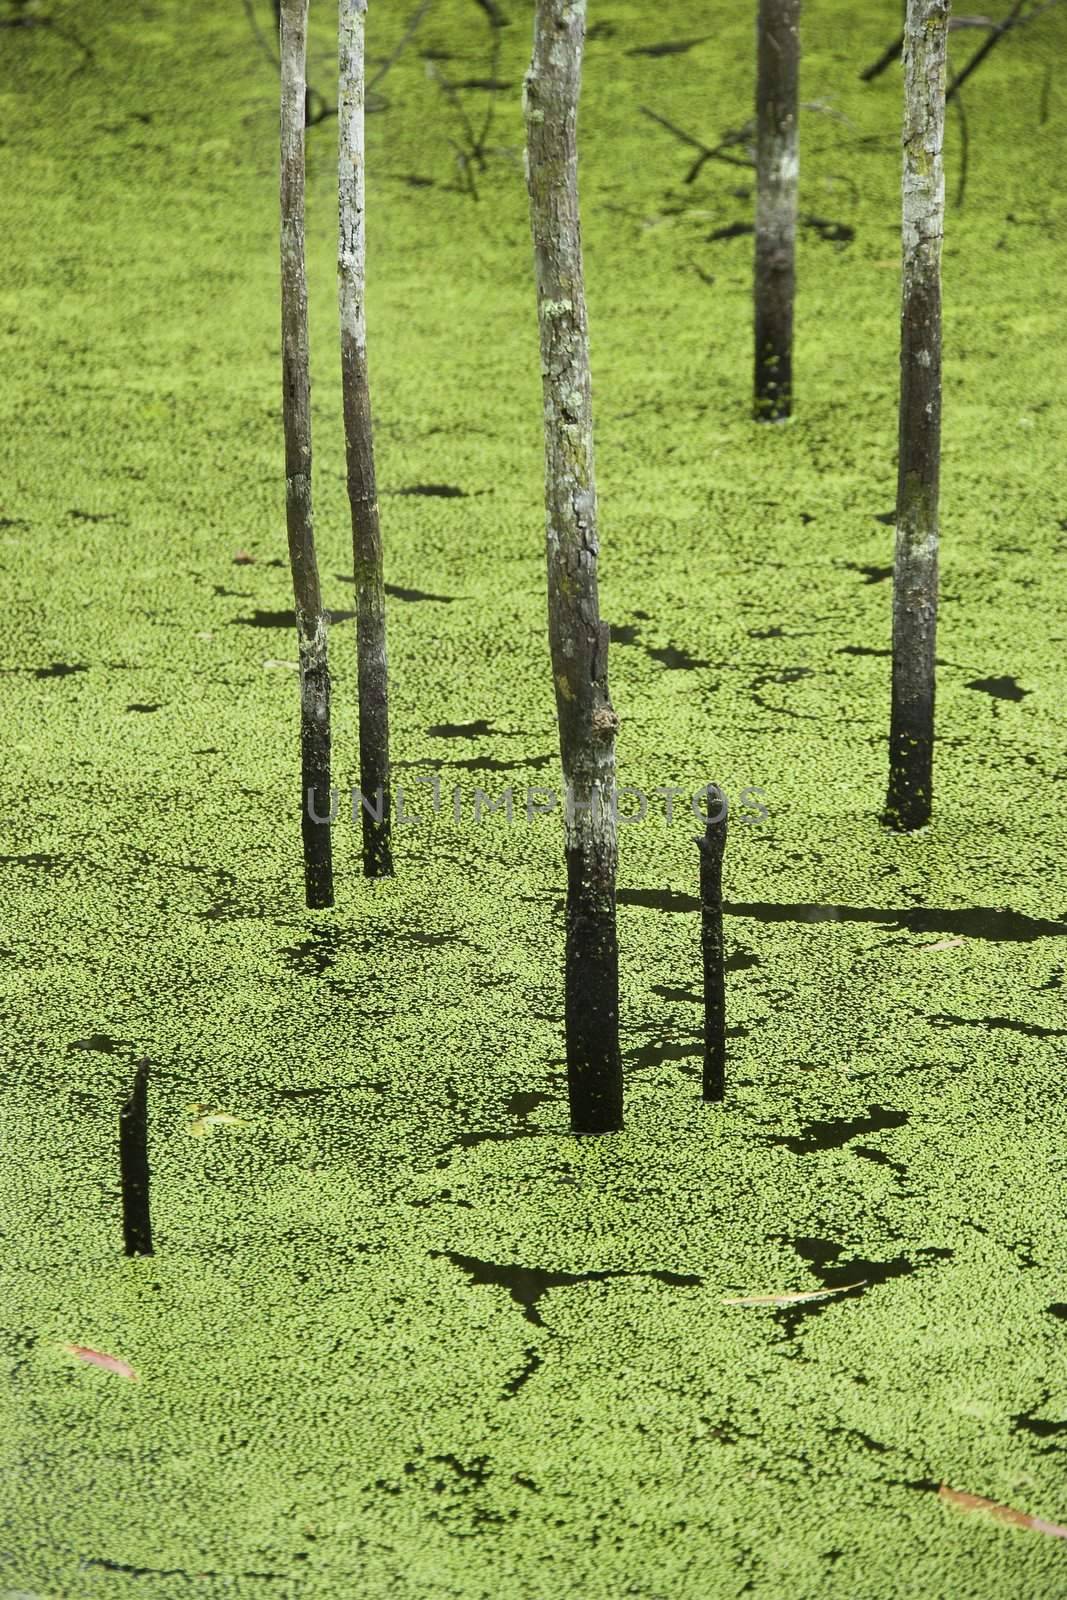 Swamp with trees growing in water and plants, Australia.